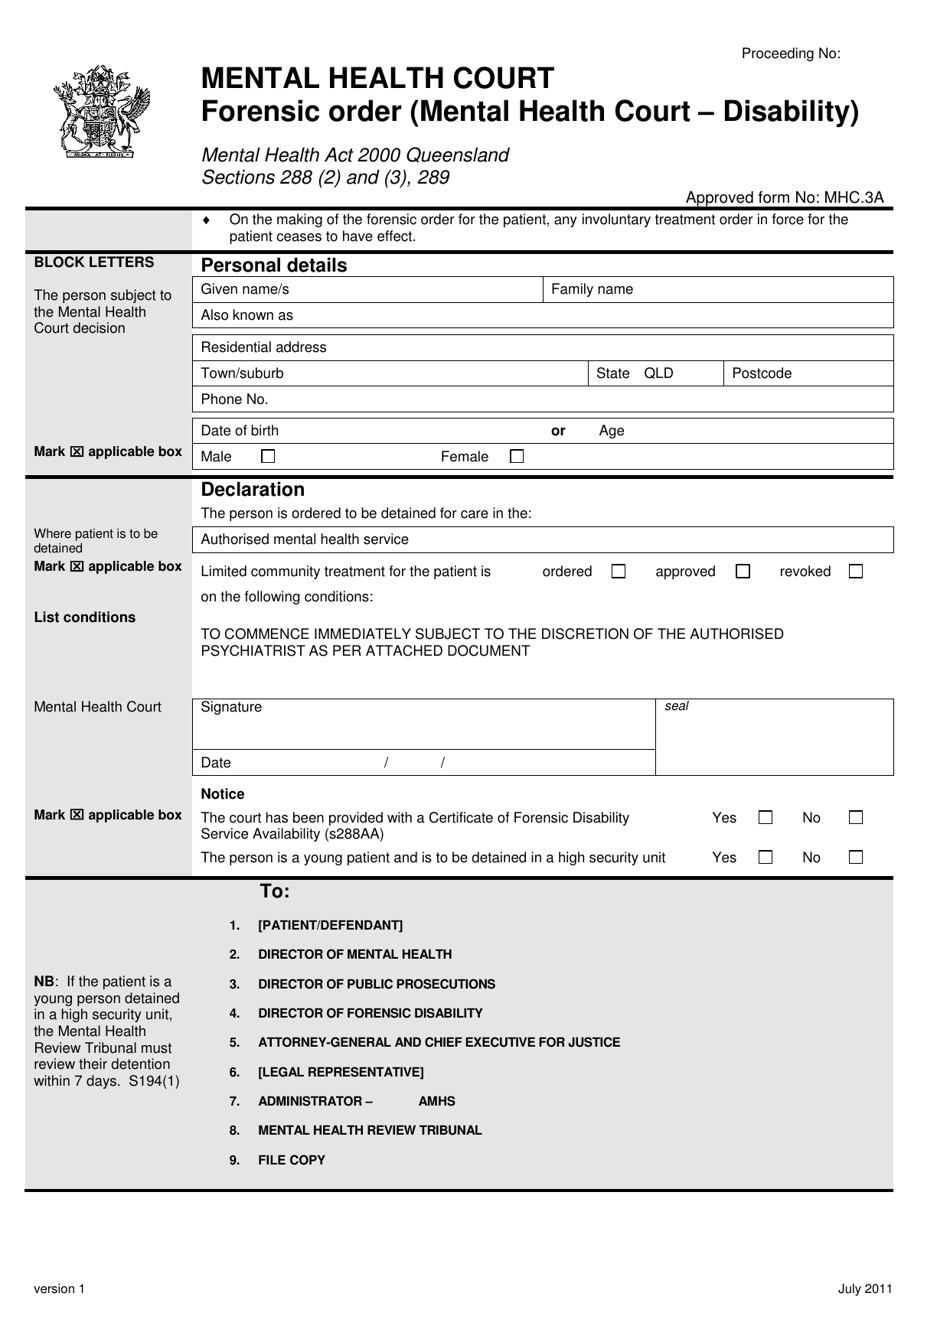 Form MHC.3A Forensic Order (Mental Health Court - Disability) - Queensland, Australia, Page 1